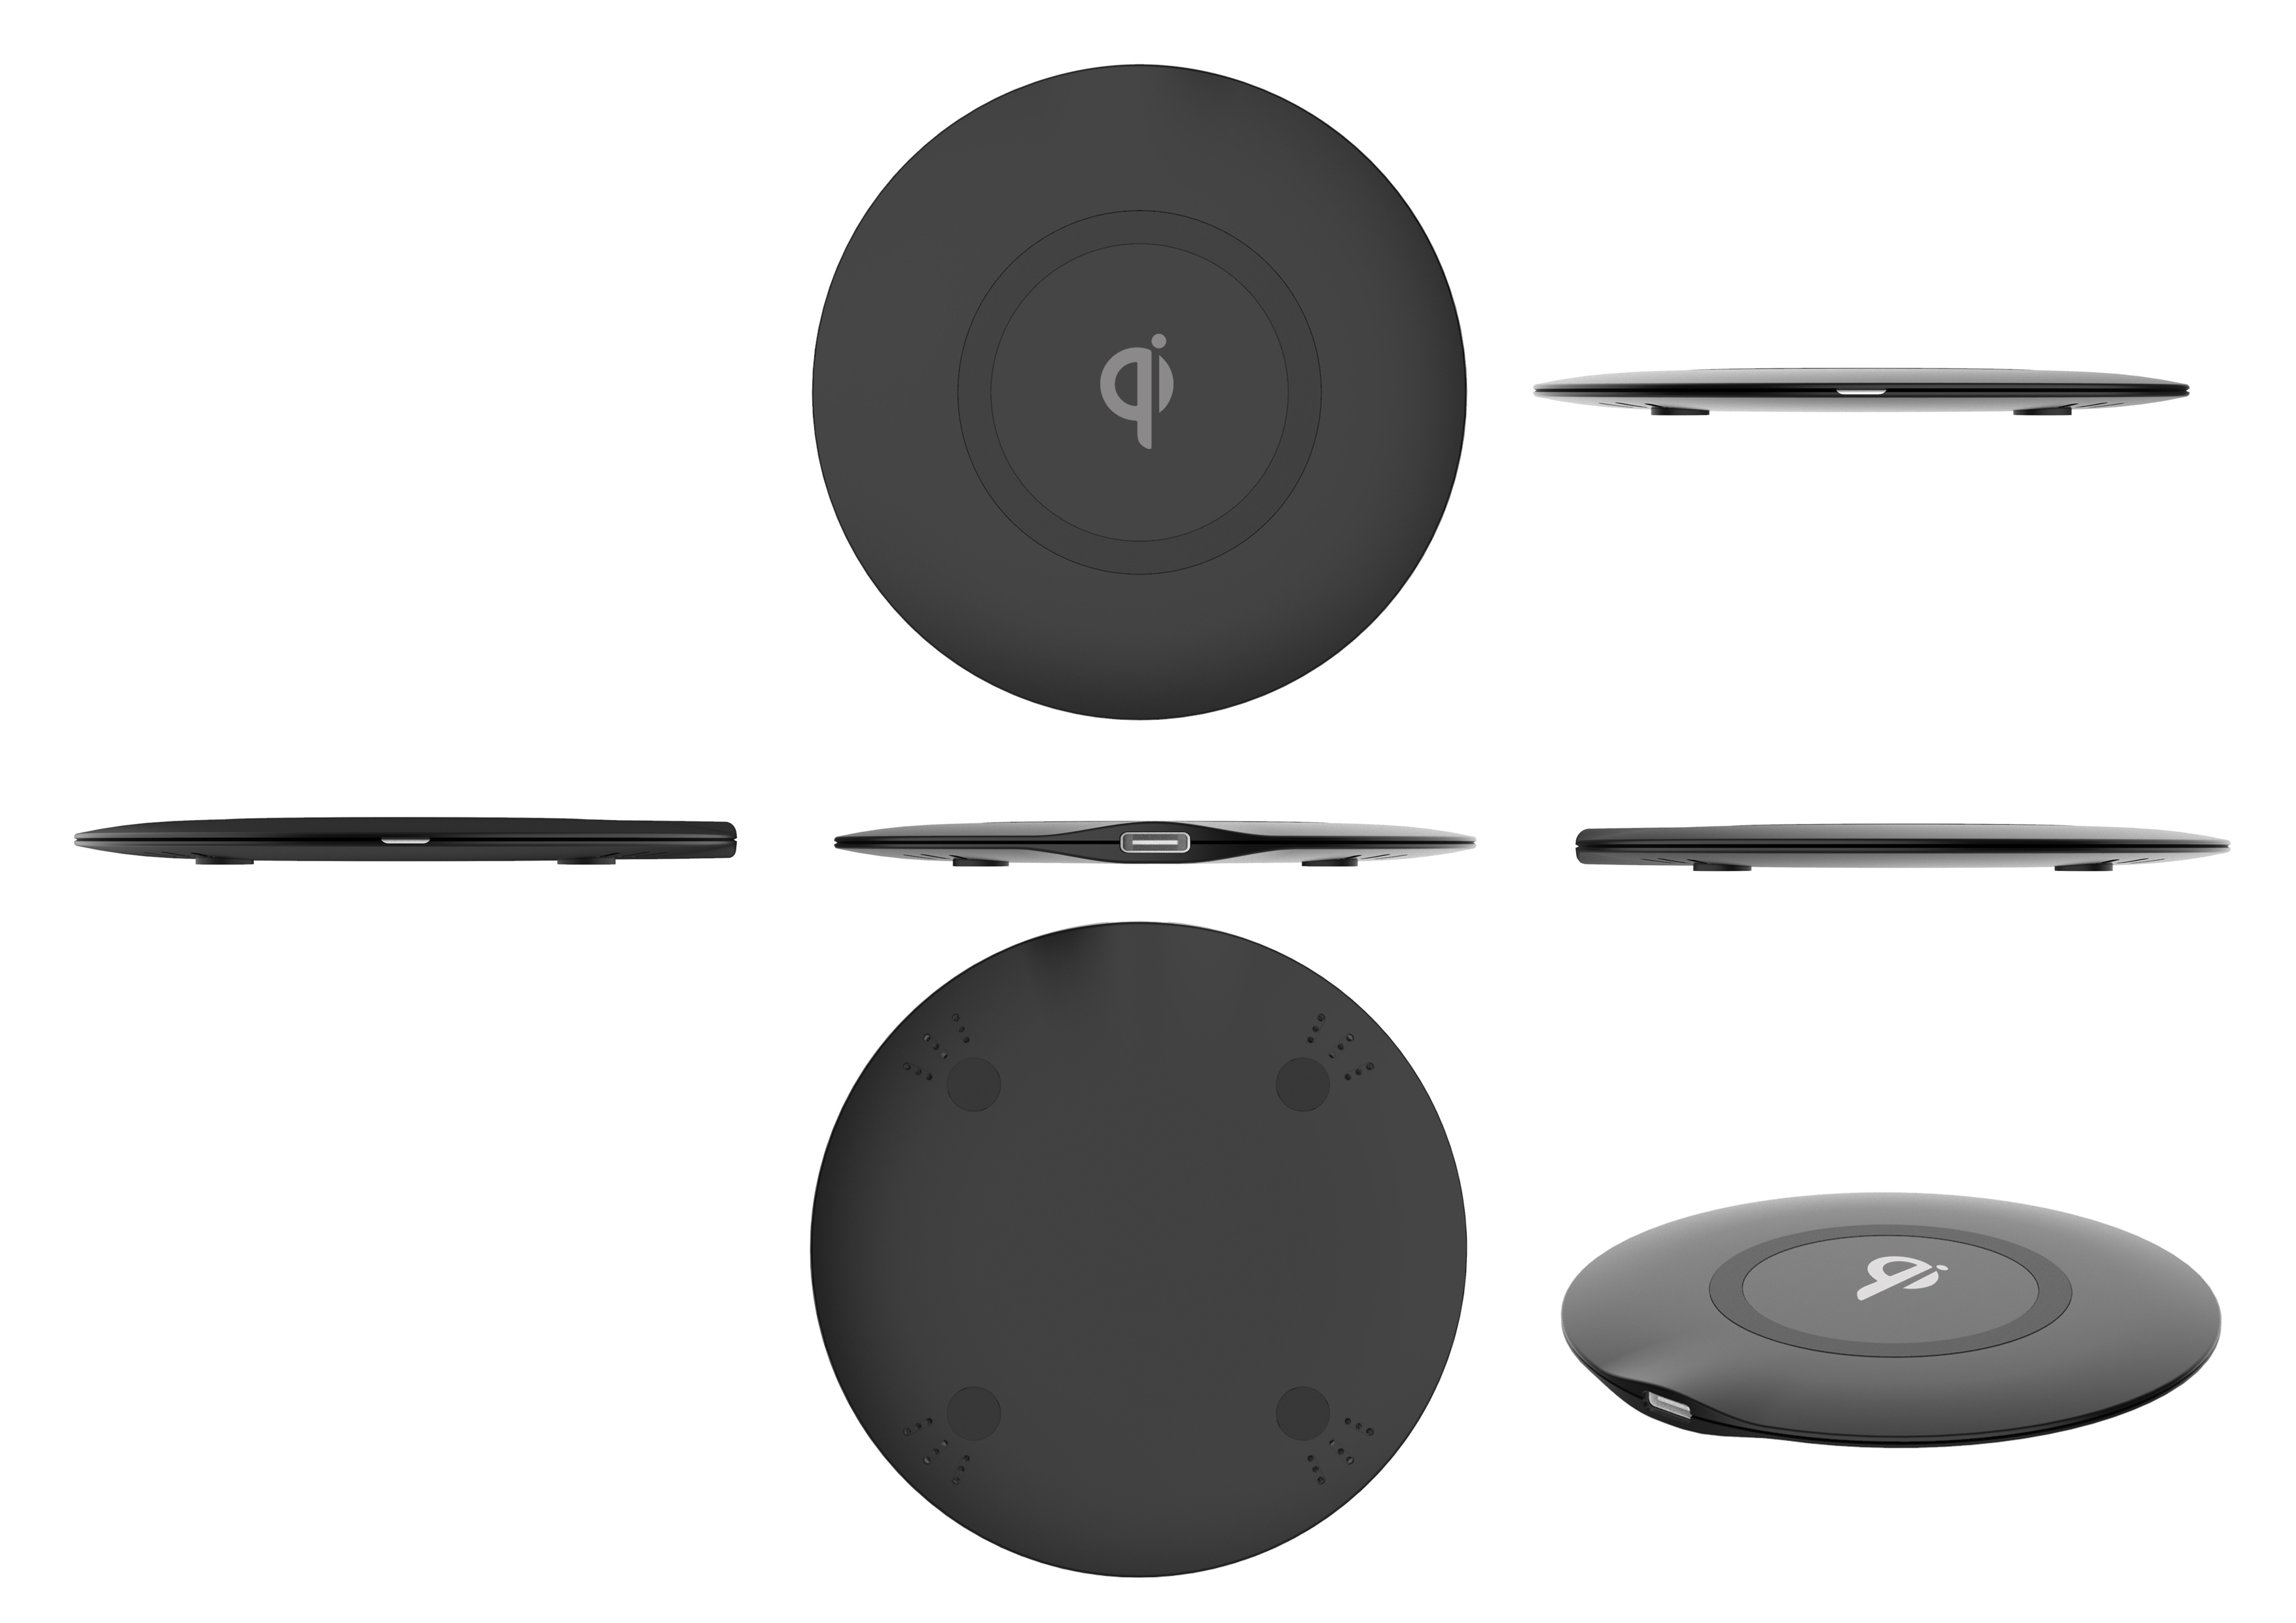 Super P Super Slim Wireless Charging Pad, 15W Fast Charging Pad with